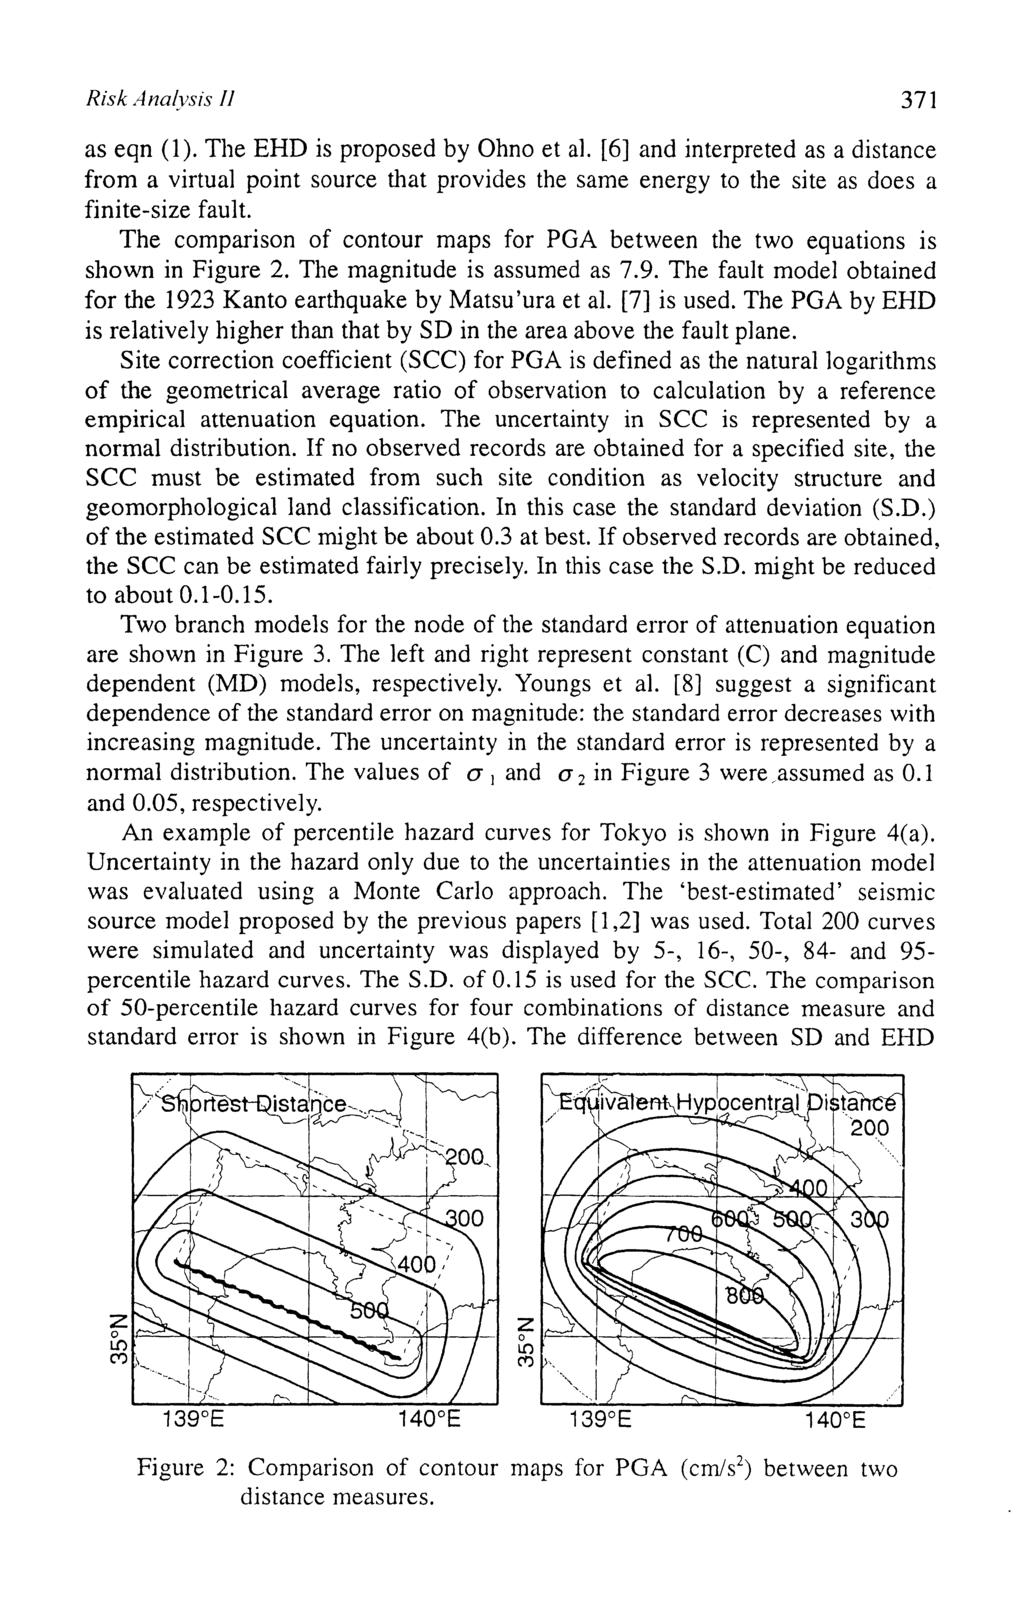 Risk Analysis II 371 as eqn (1). The EHD is proposed by Ohno et al. [6] and interpreted as a distance from a virtual point source that provides the same energy to the site as does a finite-size fault.